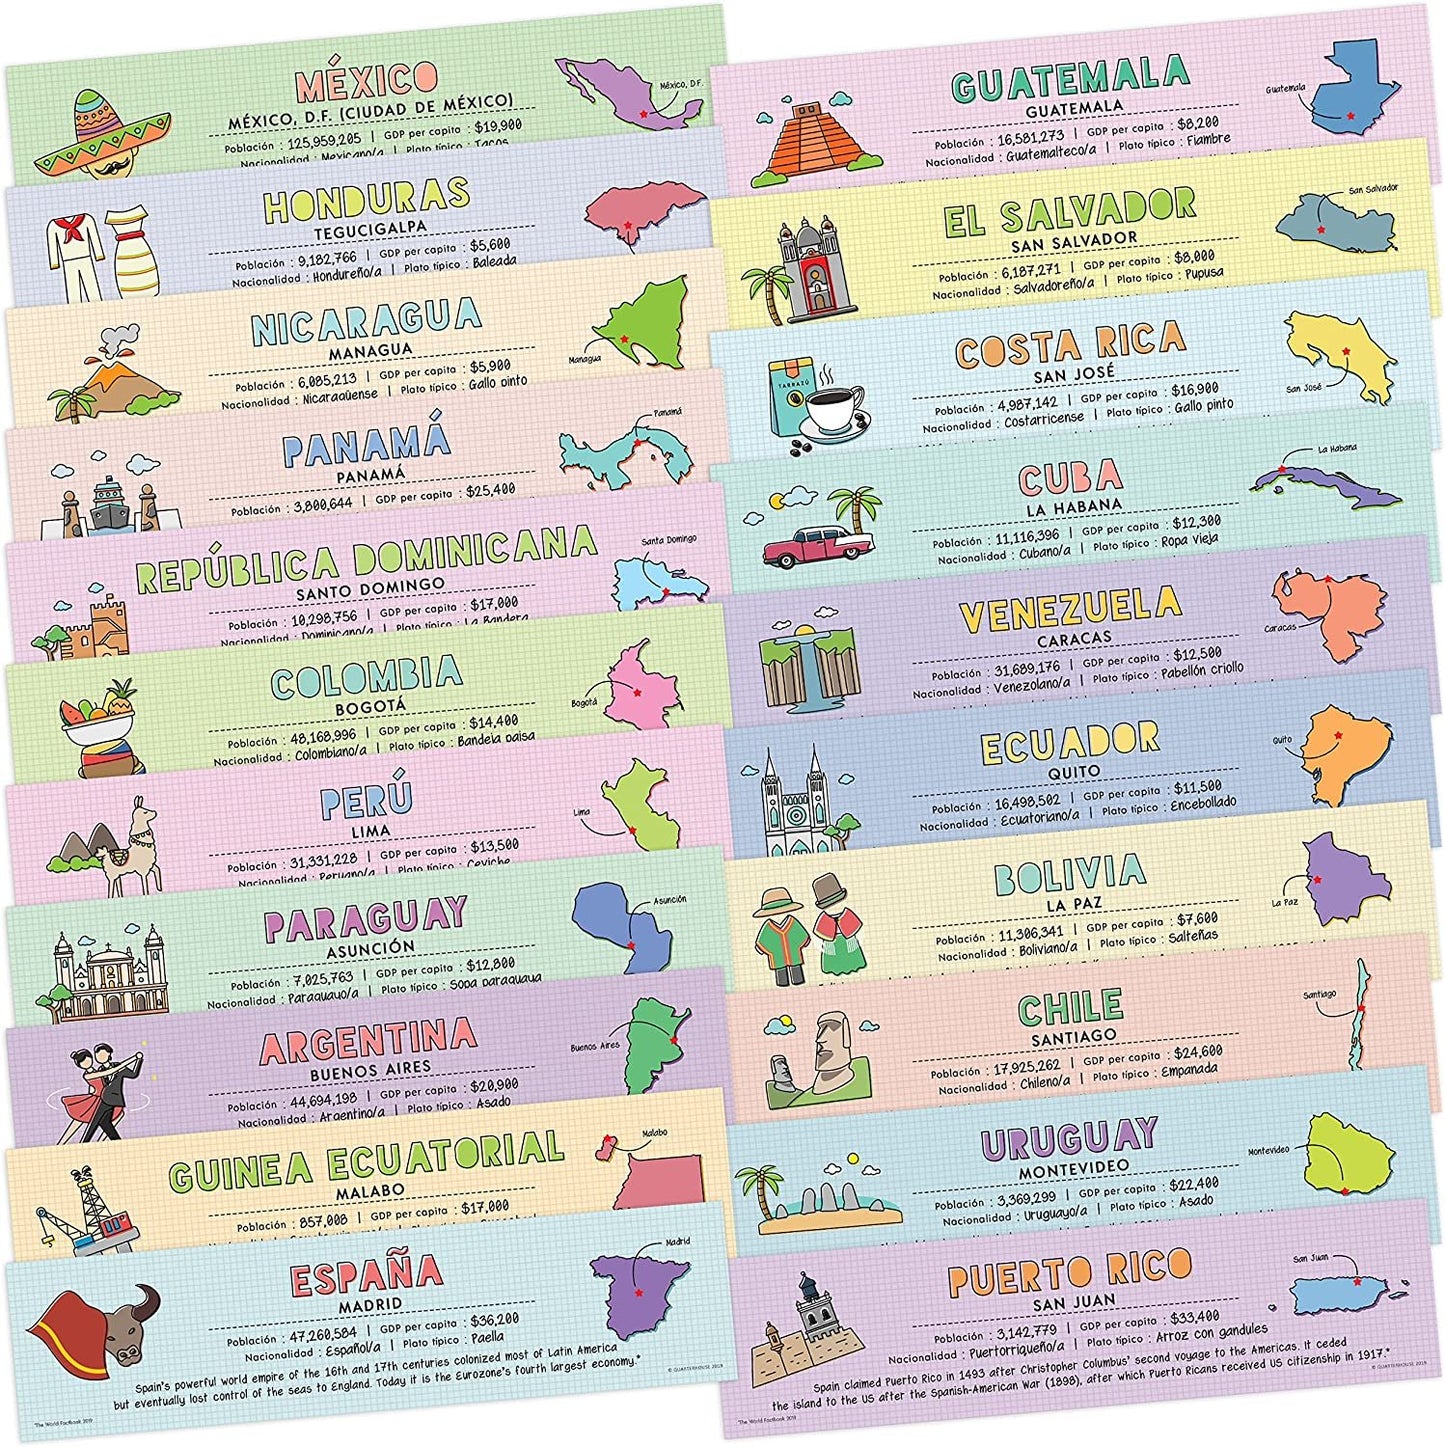 Quarterhouse Spanish Language Country Labels - 18 Latin American Countries Plus (New) Spain, Puerto Rico, and Equatorial Guinea - Non-Adhesive Label Set, Spanish Learning Materials for K-12 Students and Teachers, Set of 21, 12 x 3 Inches, Extra Durable